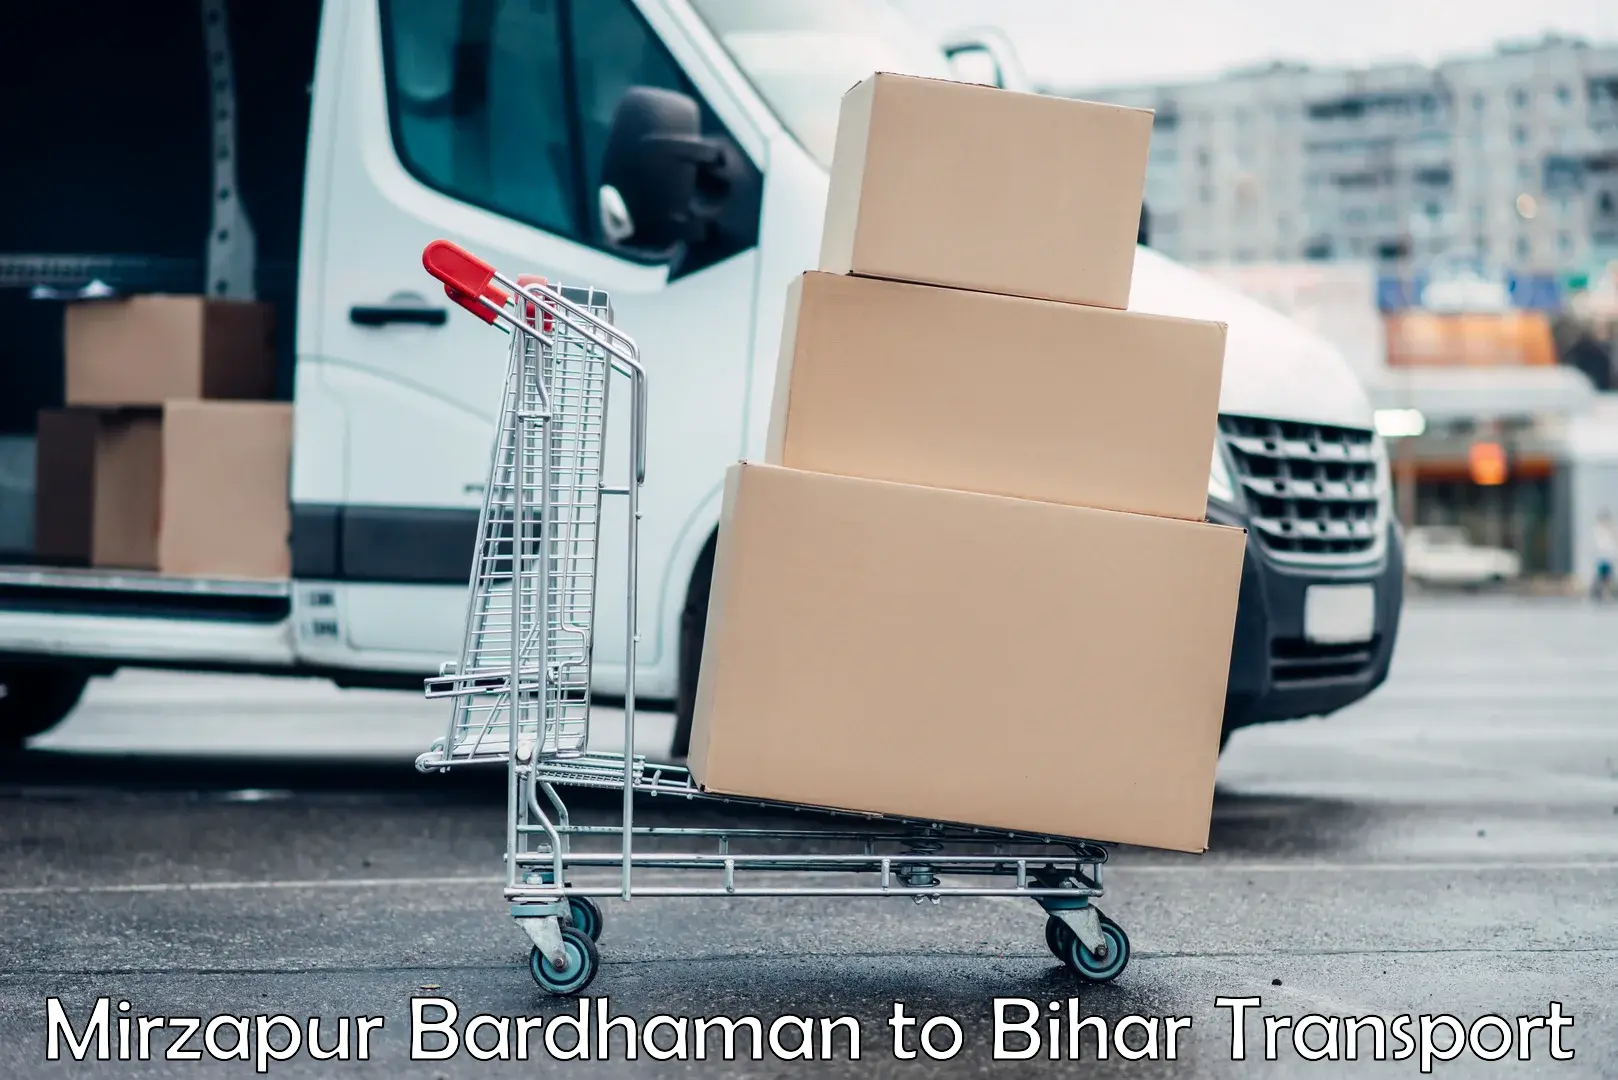 Material transport services in Mirzapur Bardhaman to Aurai